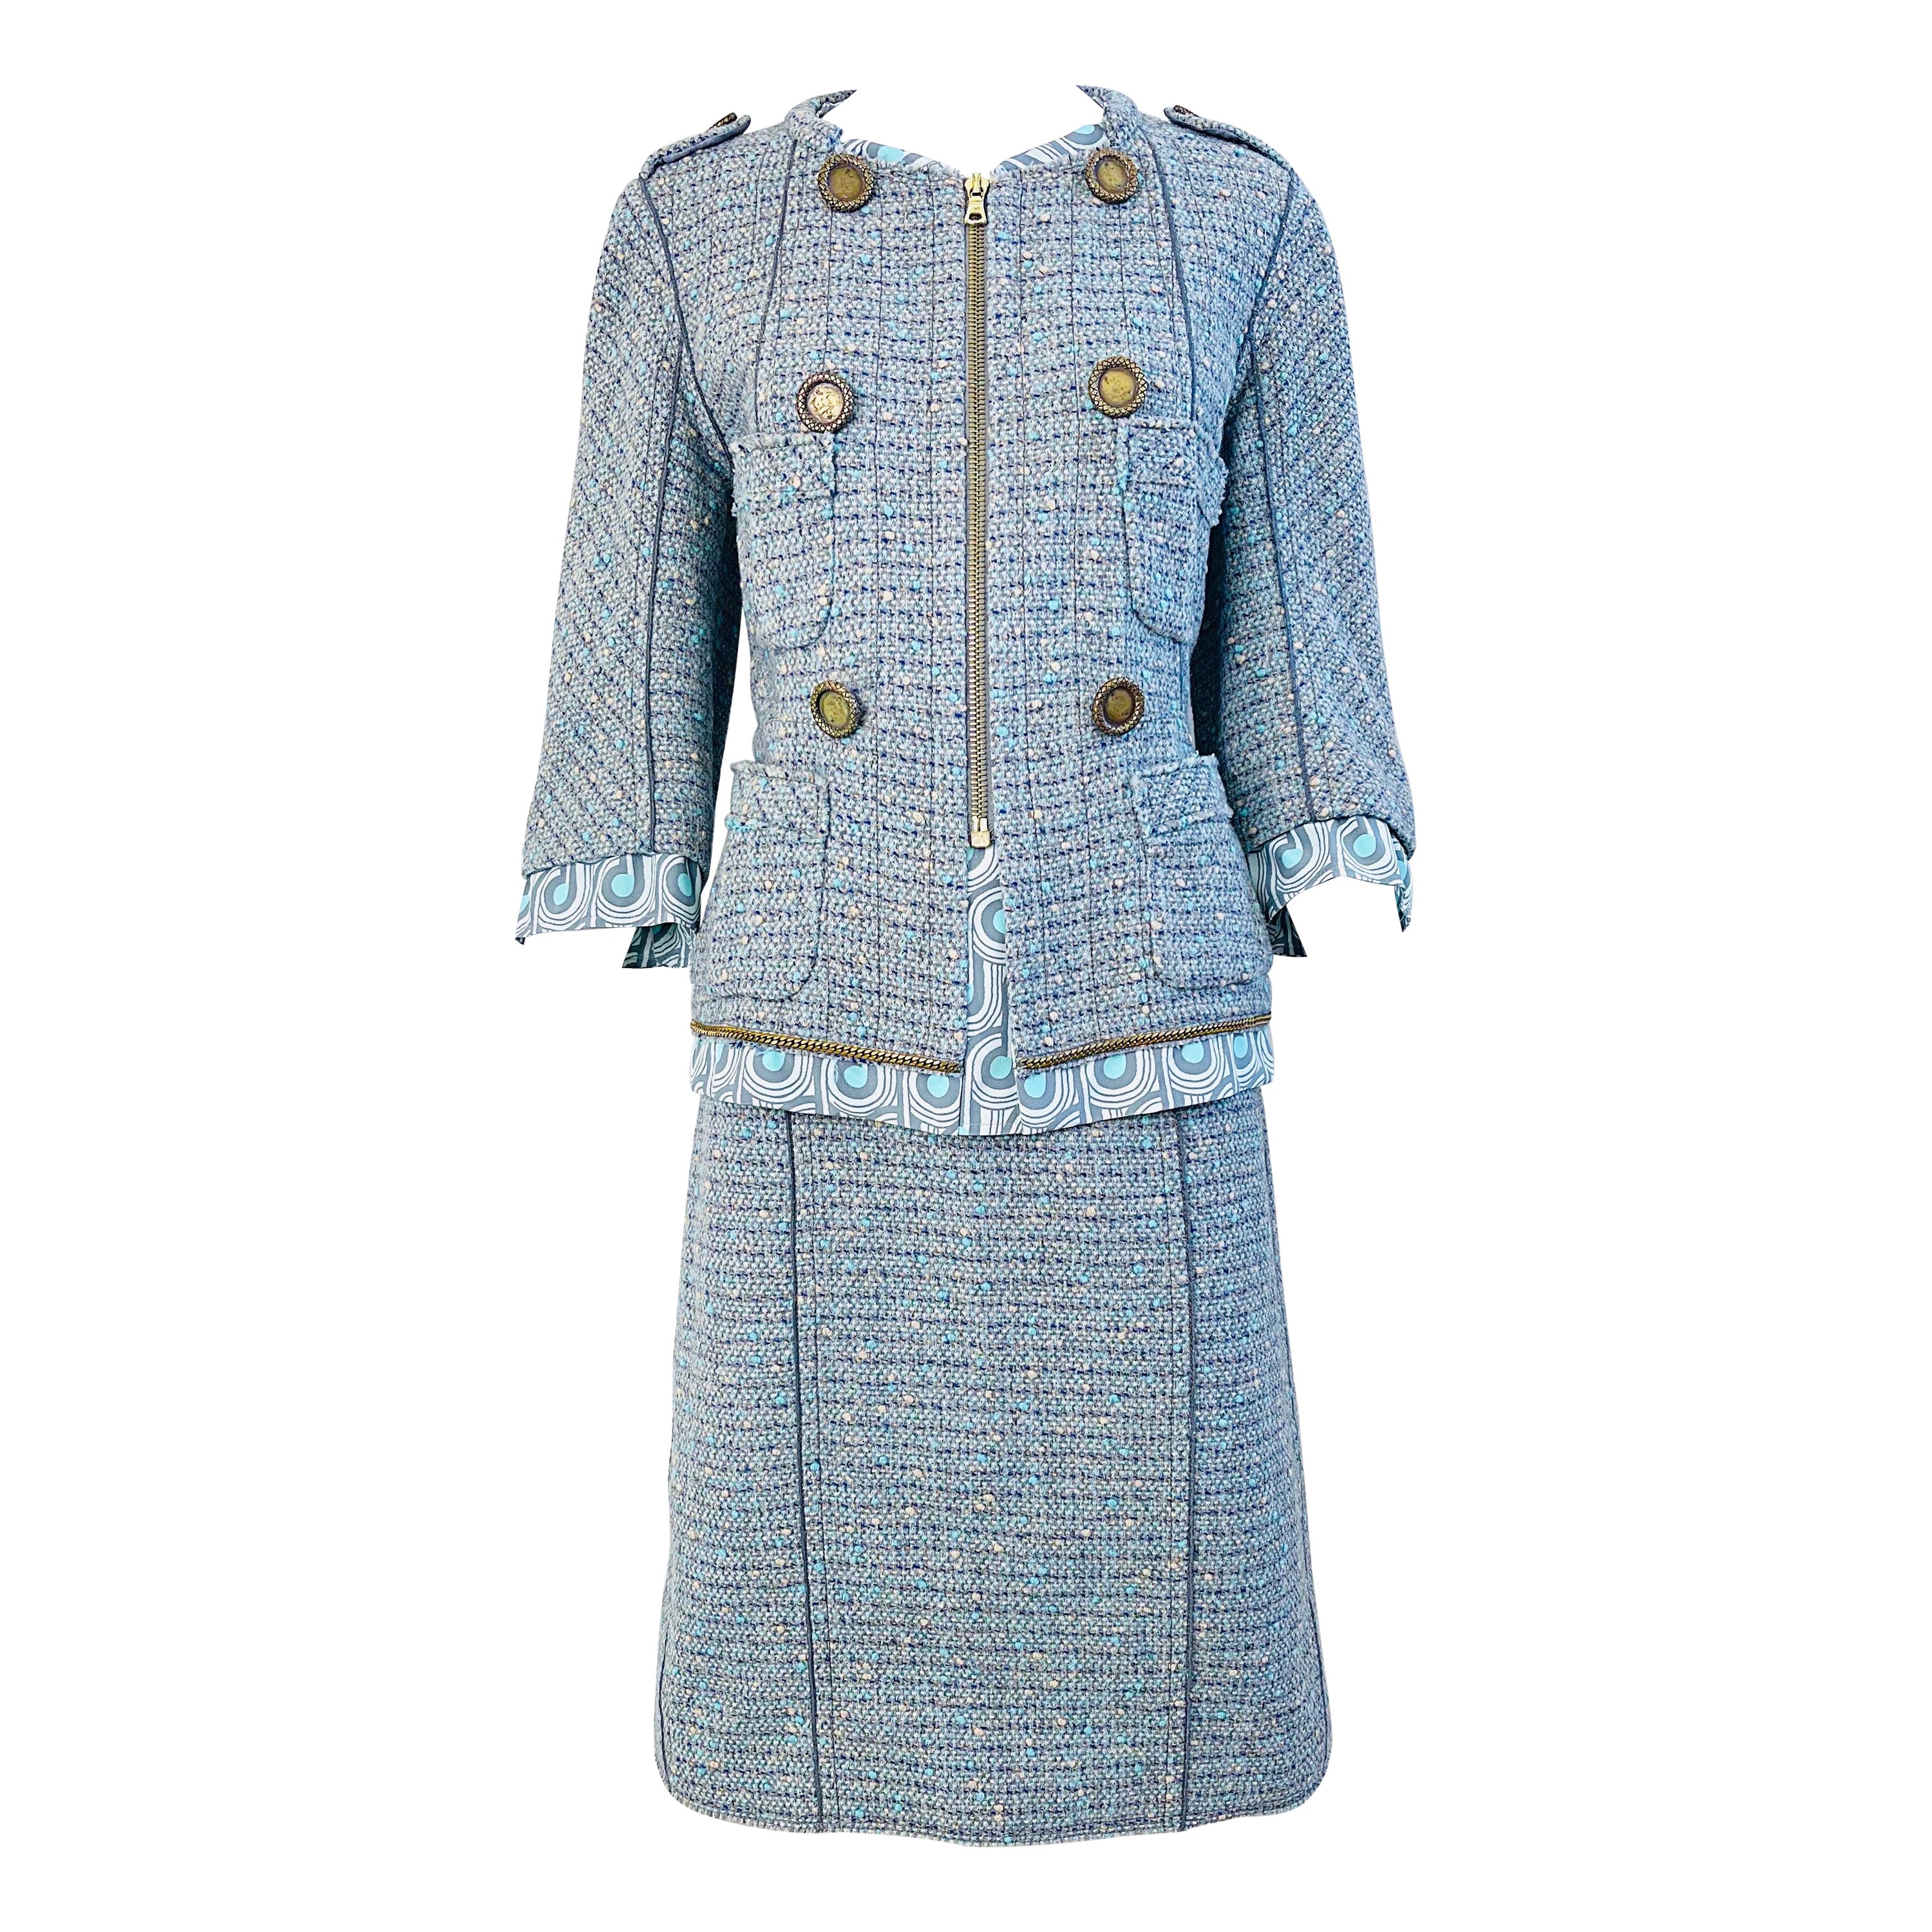 Marc Jacobs Spring 2005 Size 8 Blue Green Fantasy Tweed Wool Skirt Suit